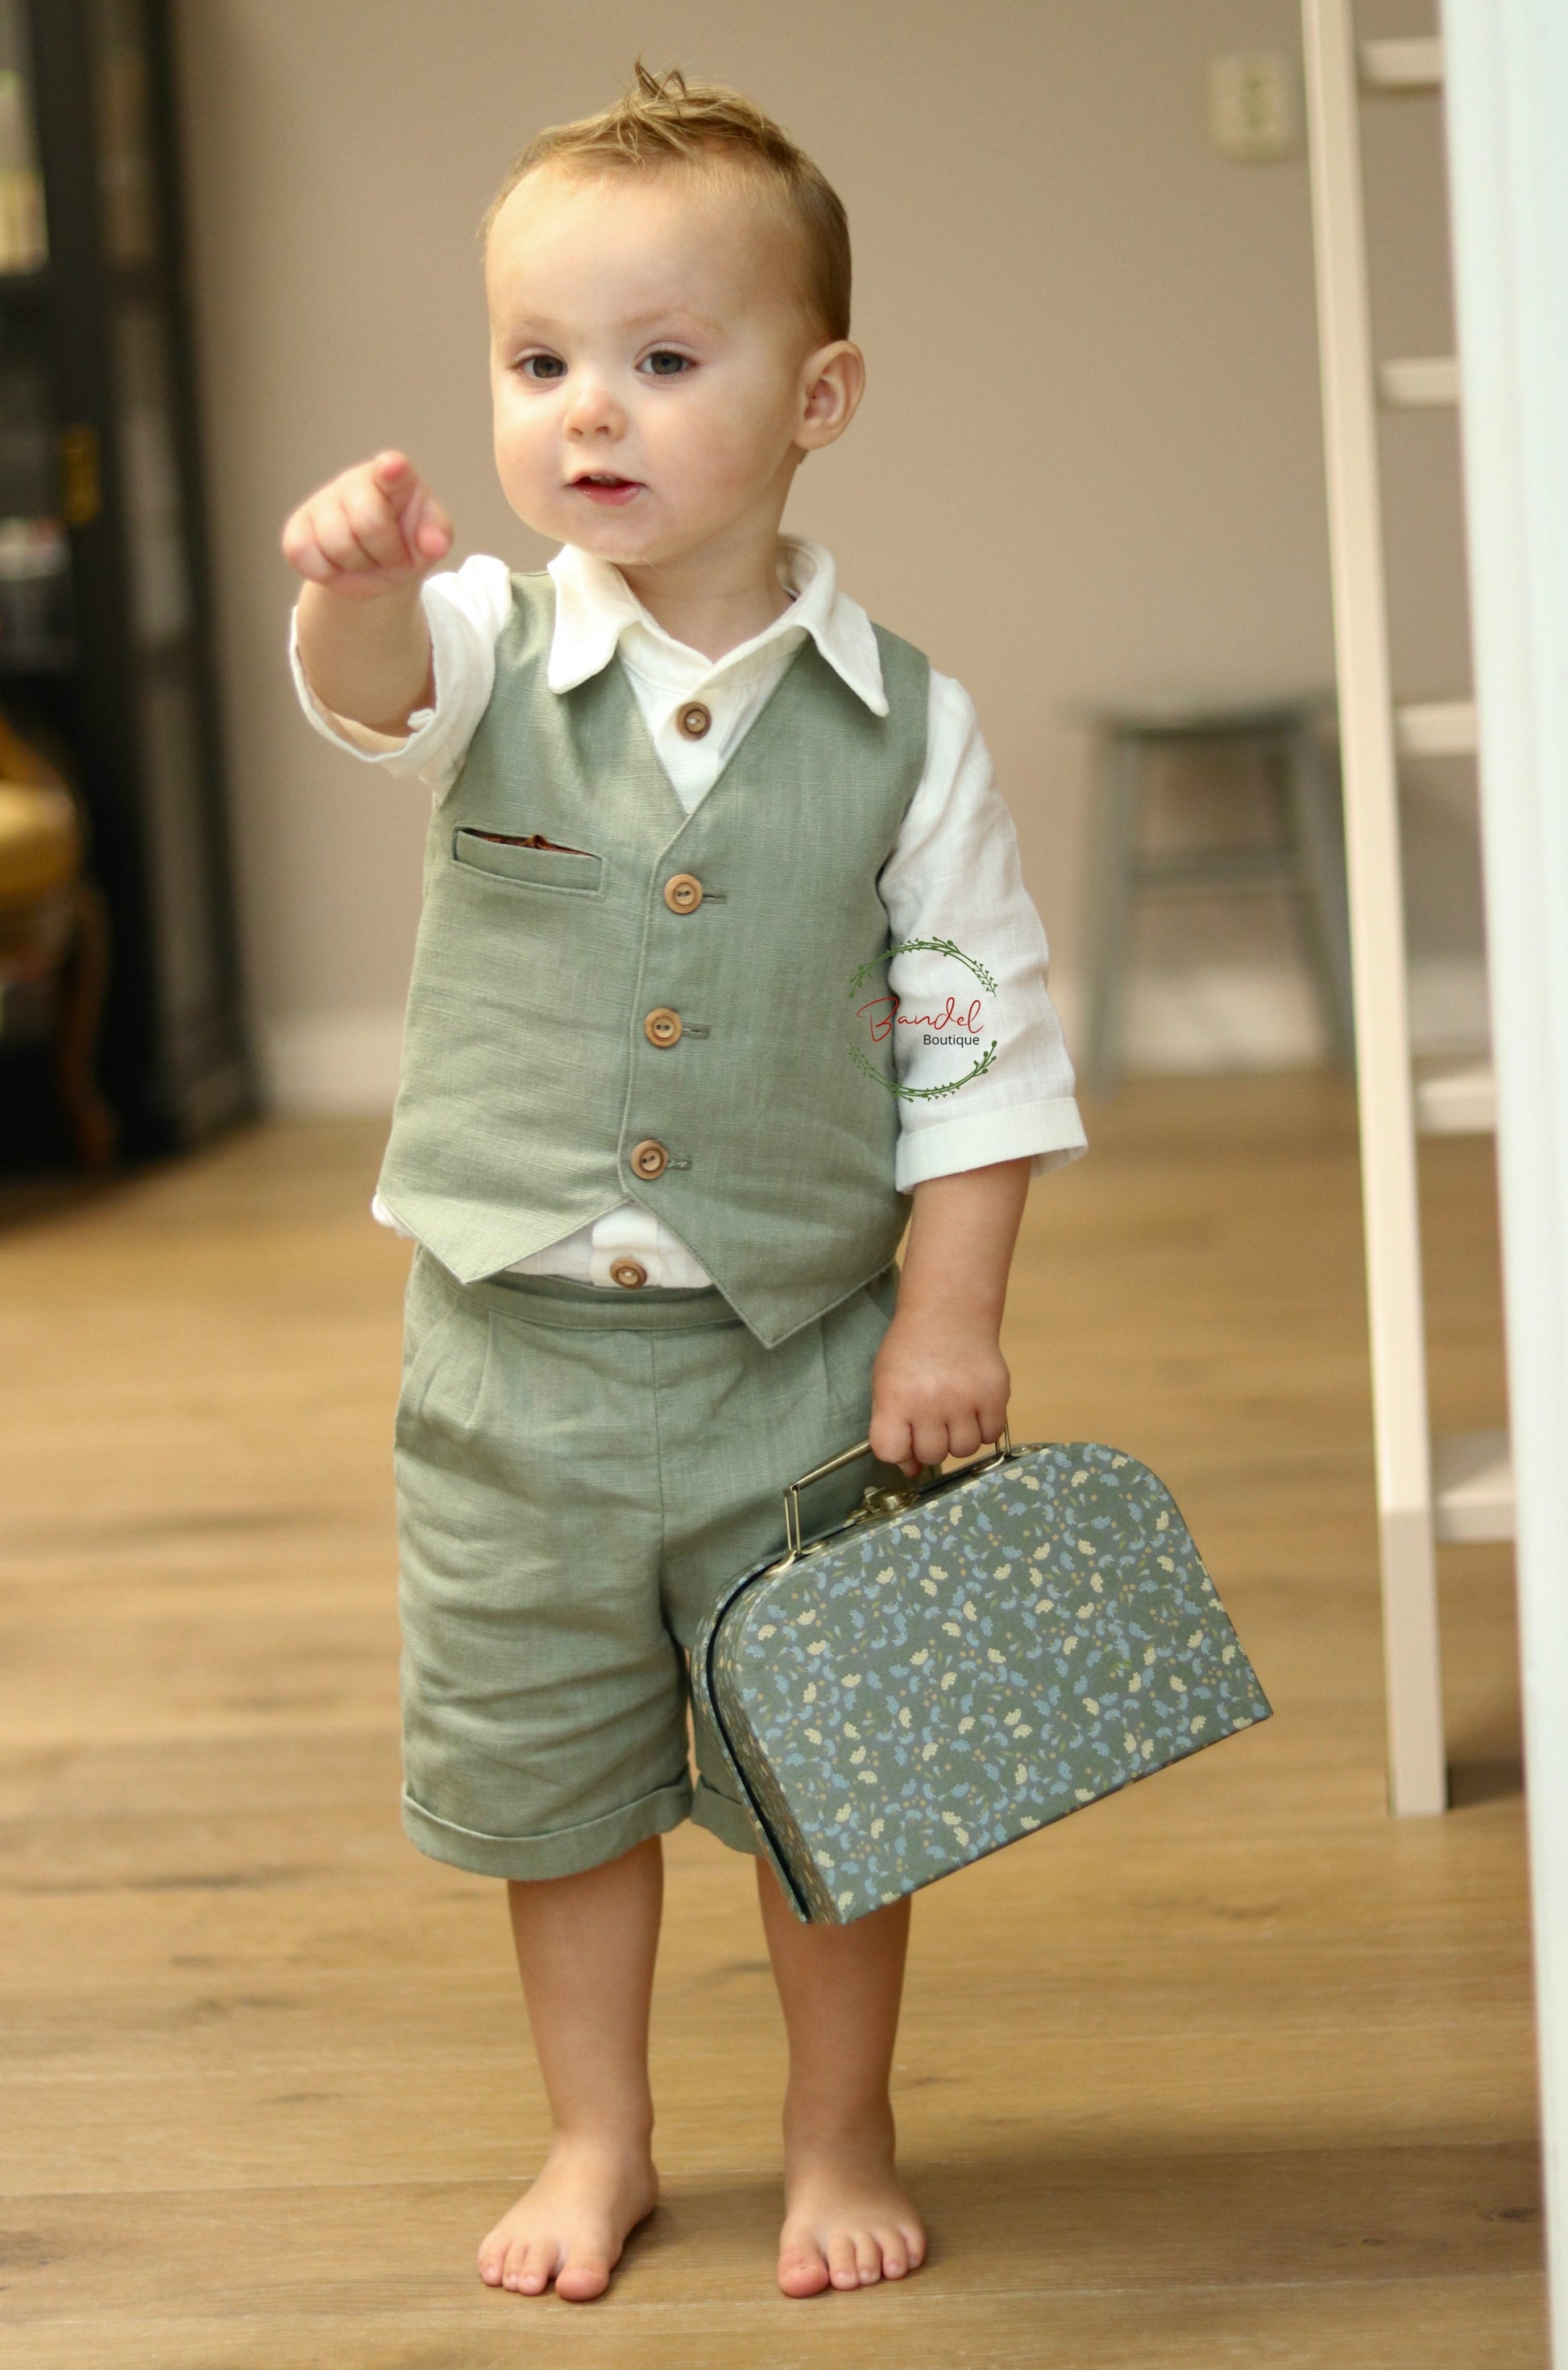 This Dark-Mint Pageboy outfit features a short and vest tailored with elasticized back waistband and front wooden buttons, and an ivory shirt with a collar and 3/4-length sleeves. Its classic design ensures a comfortable fit with two side pockets for maximum convenience.